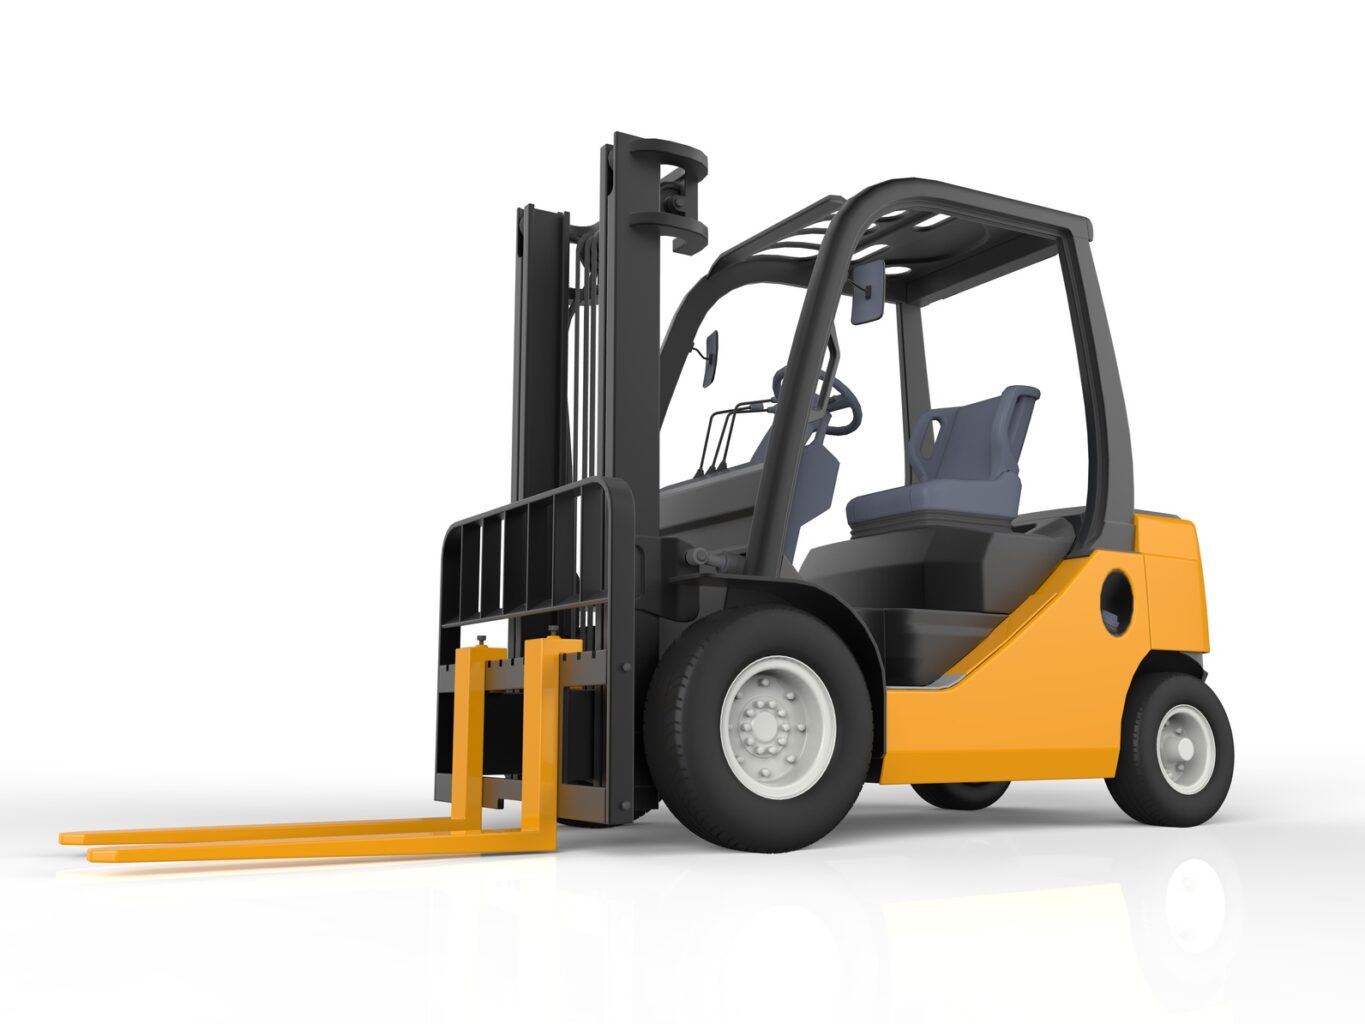 Yellow Forklift Truck, Isolated on White Background